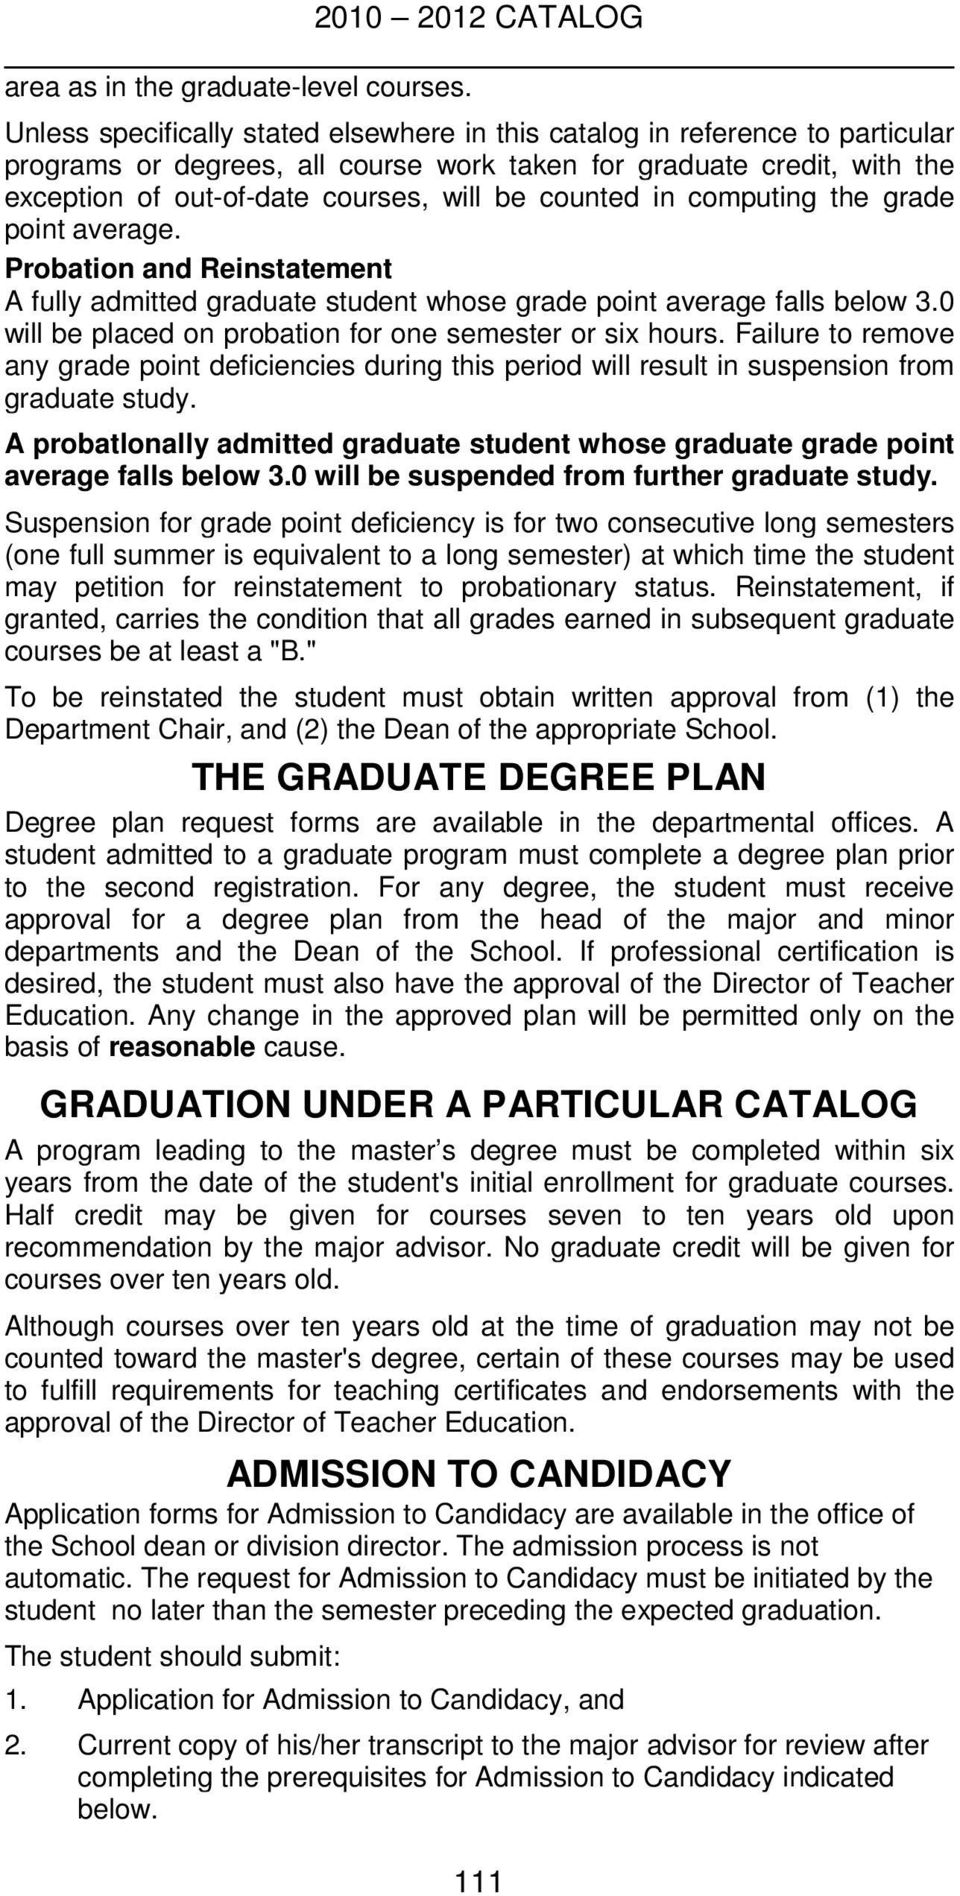 courses, will be counted in computing the grade point average. Probation and Reinstatement A fully admitted graduate student whose grade point average falls below 3.